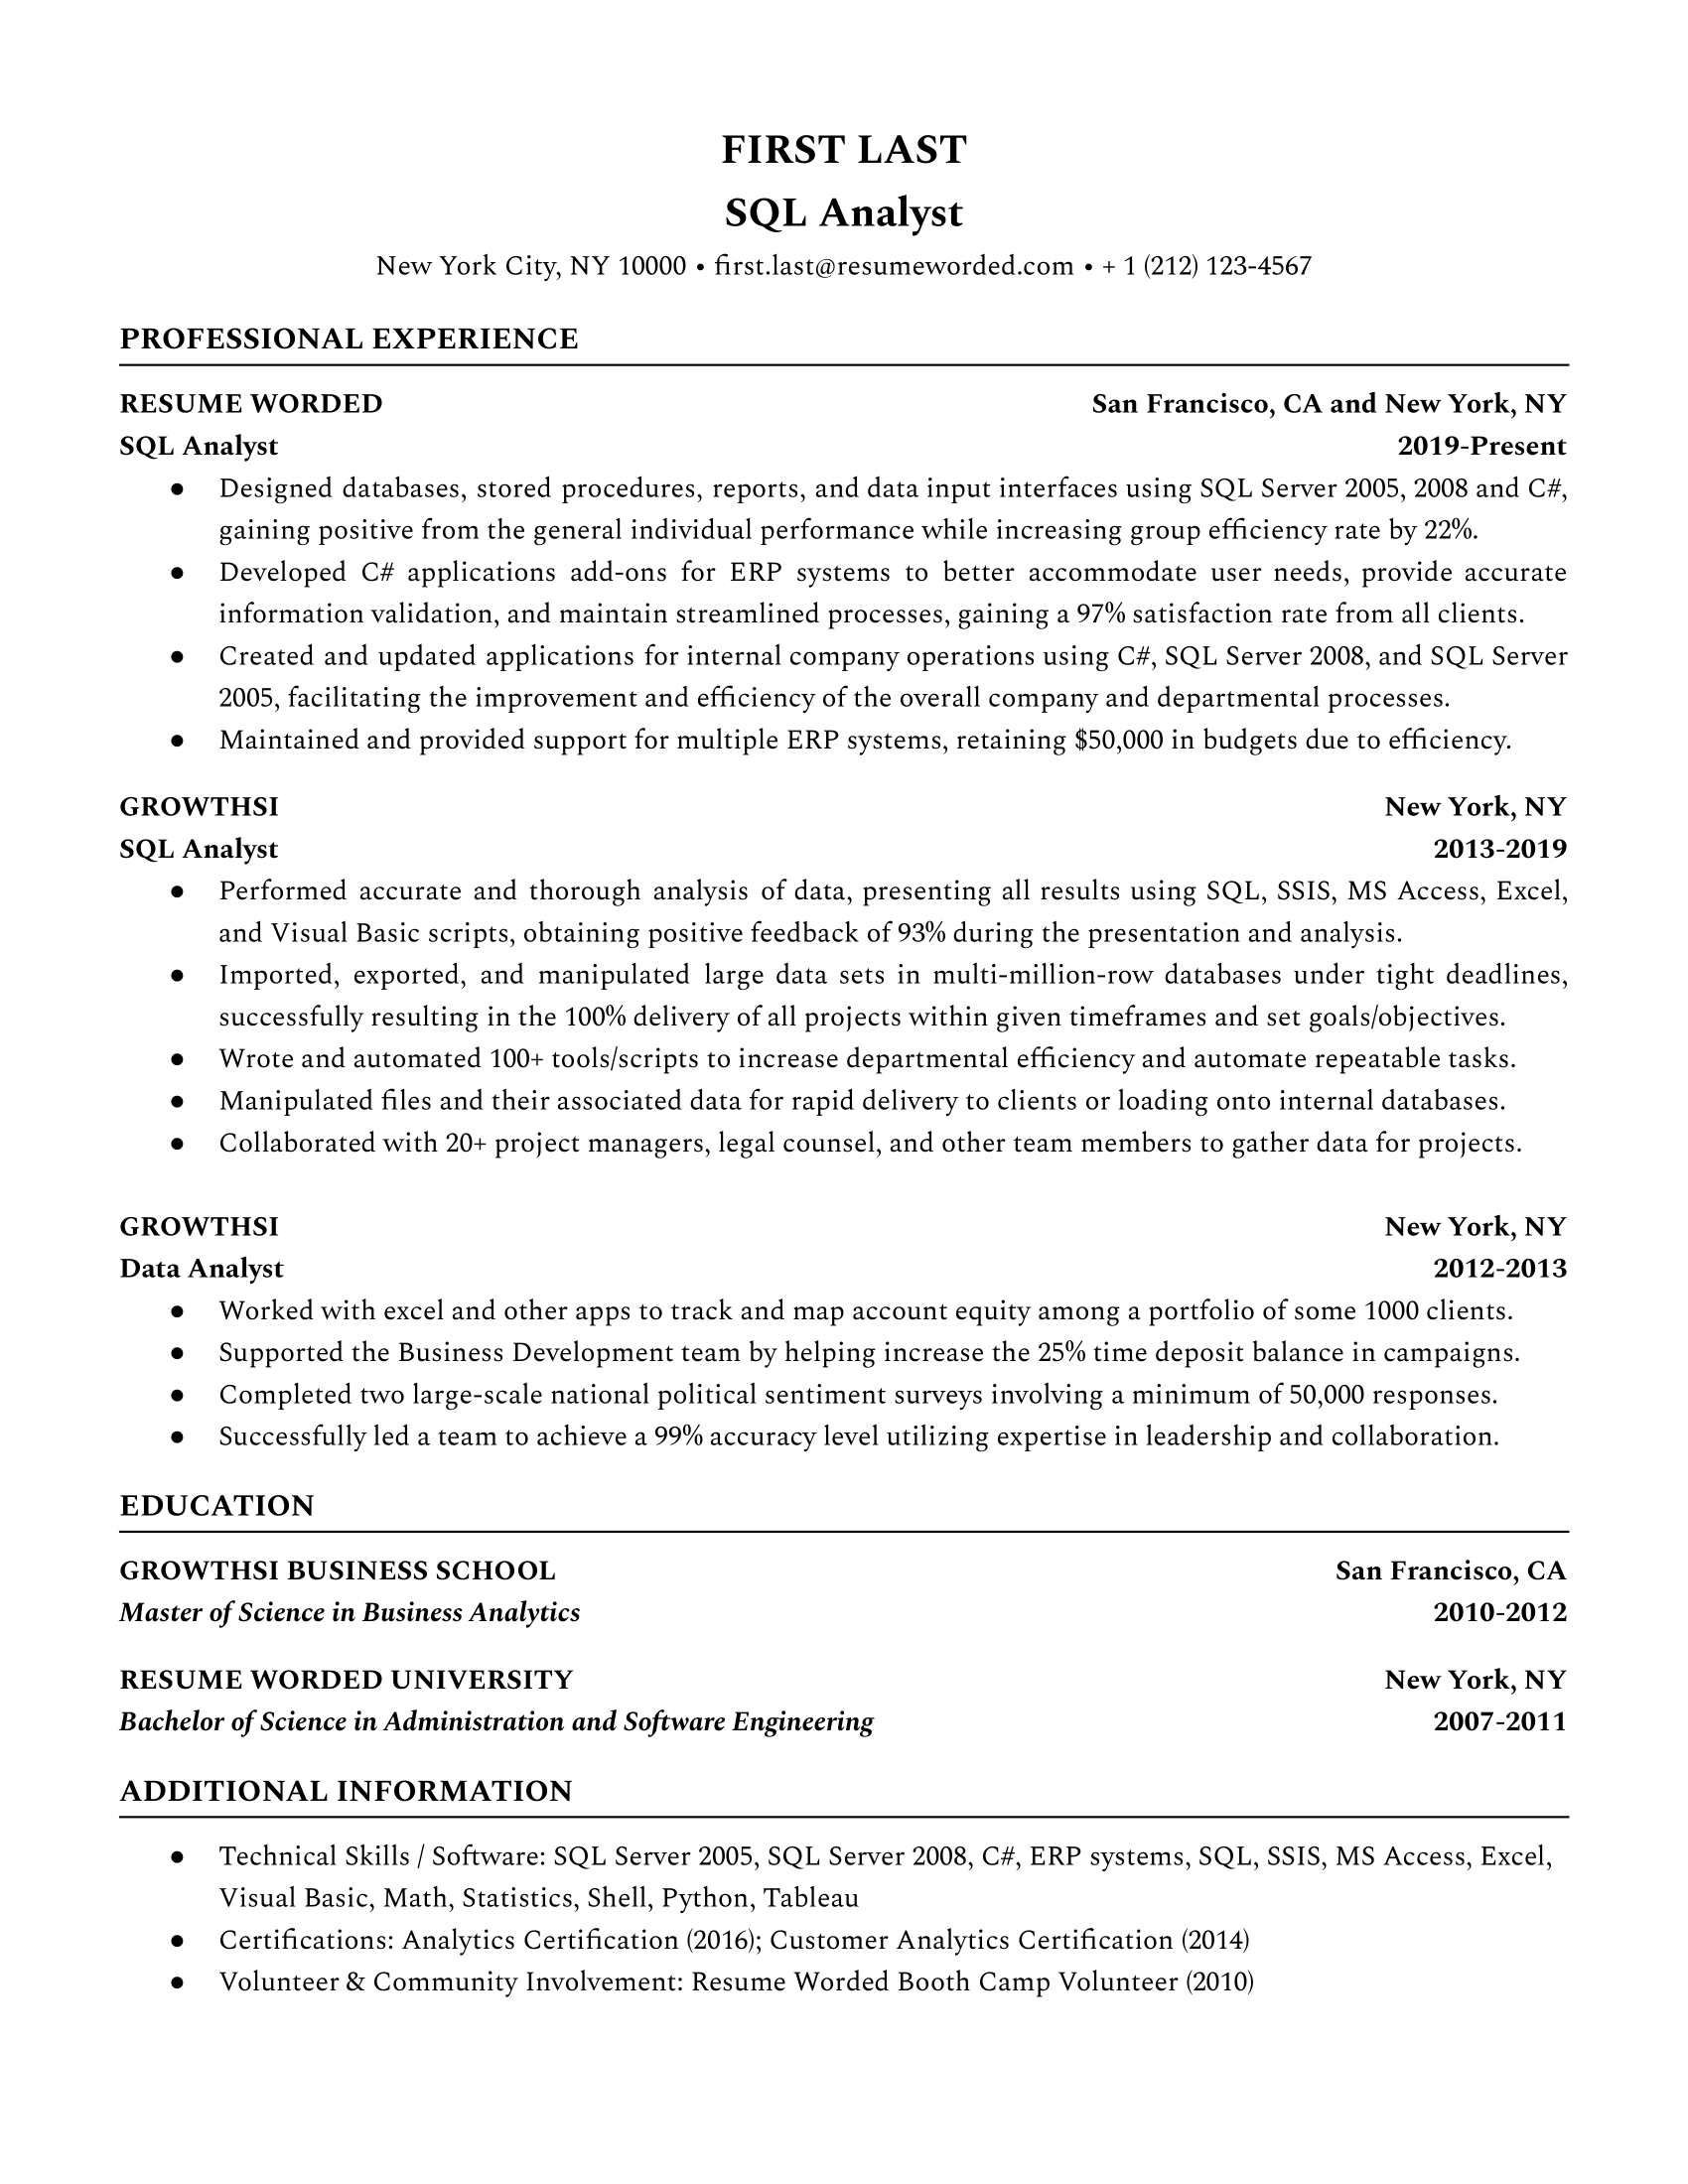 SQL Analyst Resume Template + Example